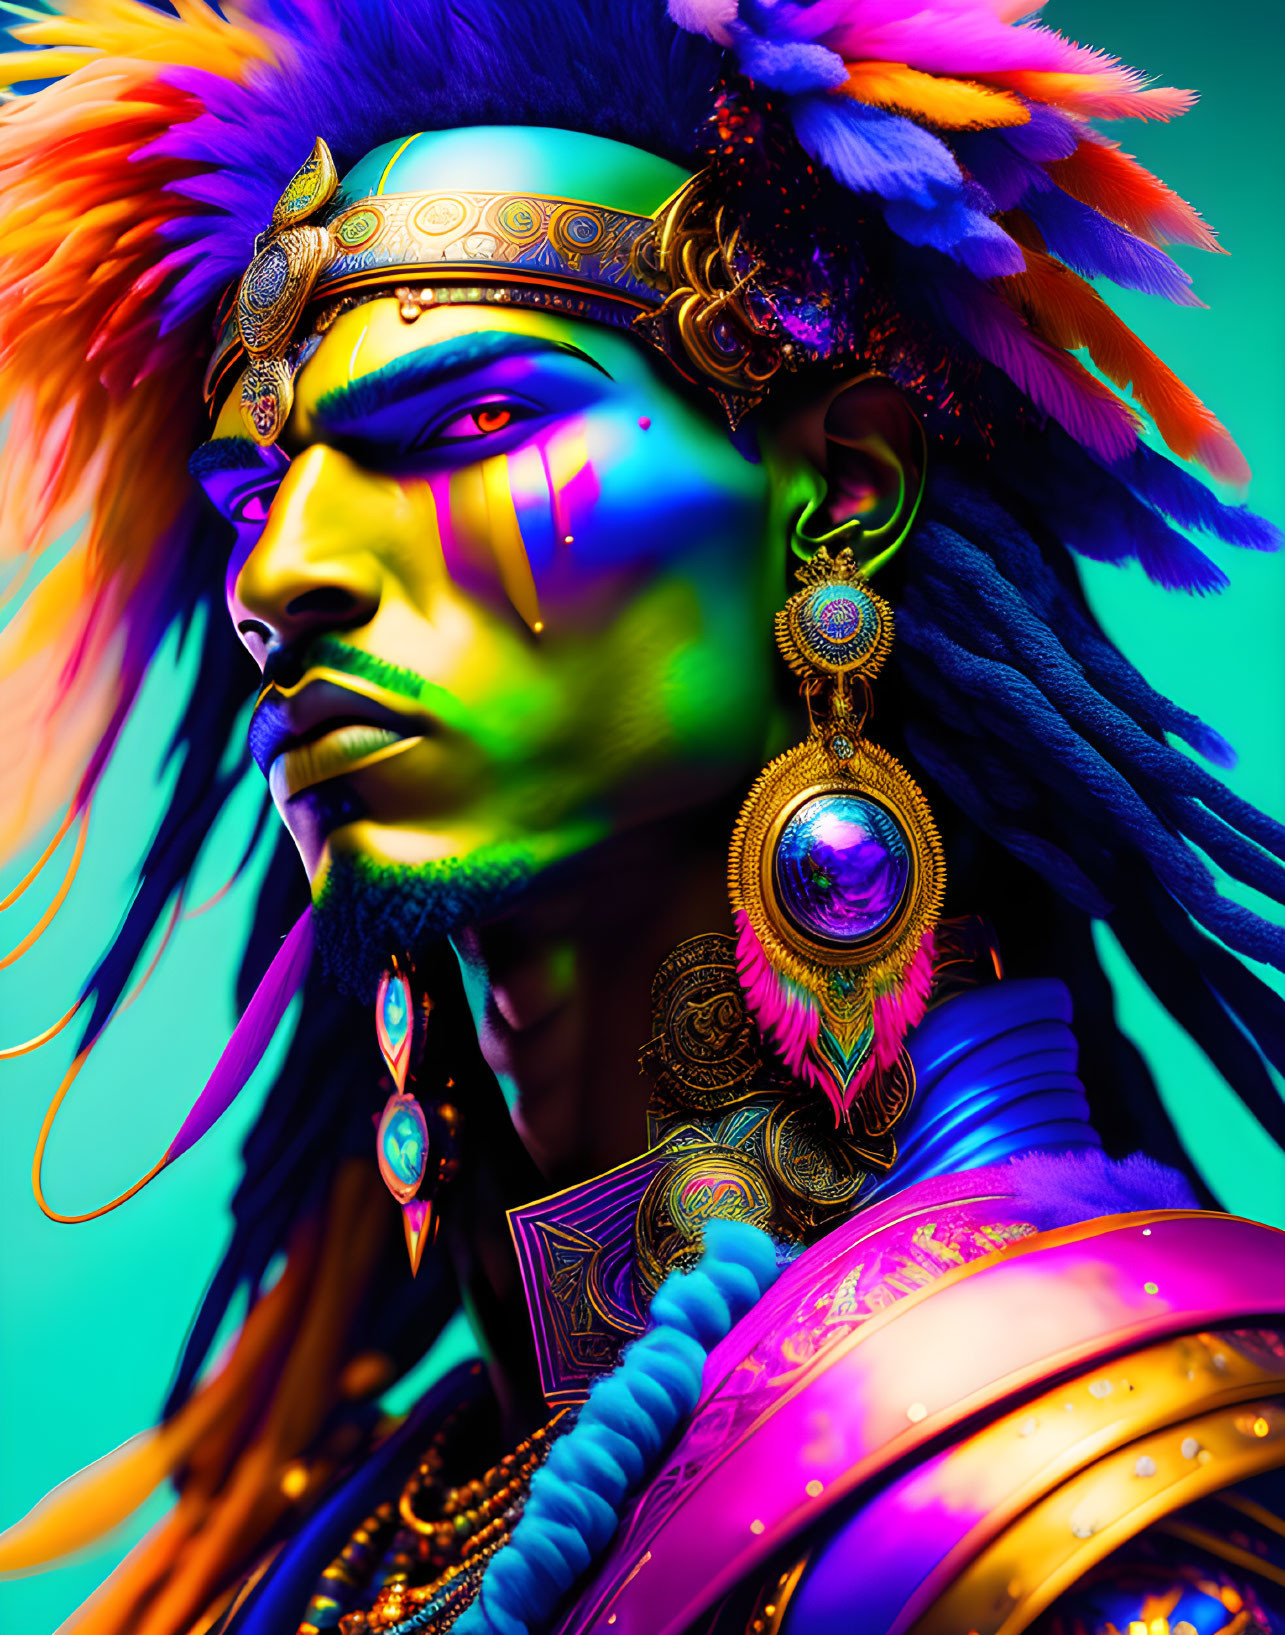 Colorful digital artwork of male figure with blue skin and gold jewelry on neon background